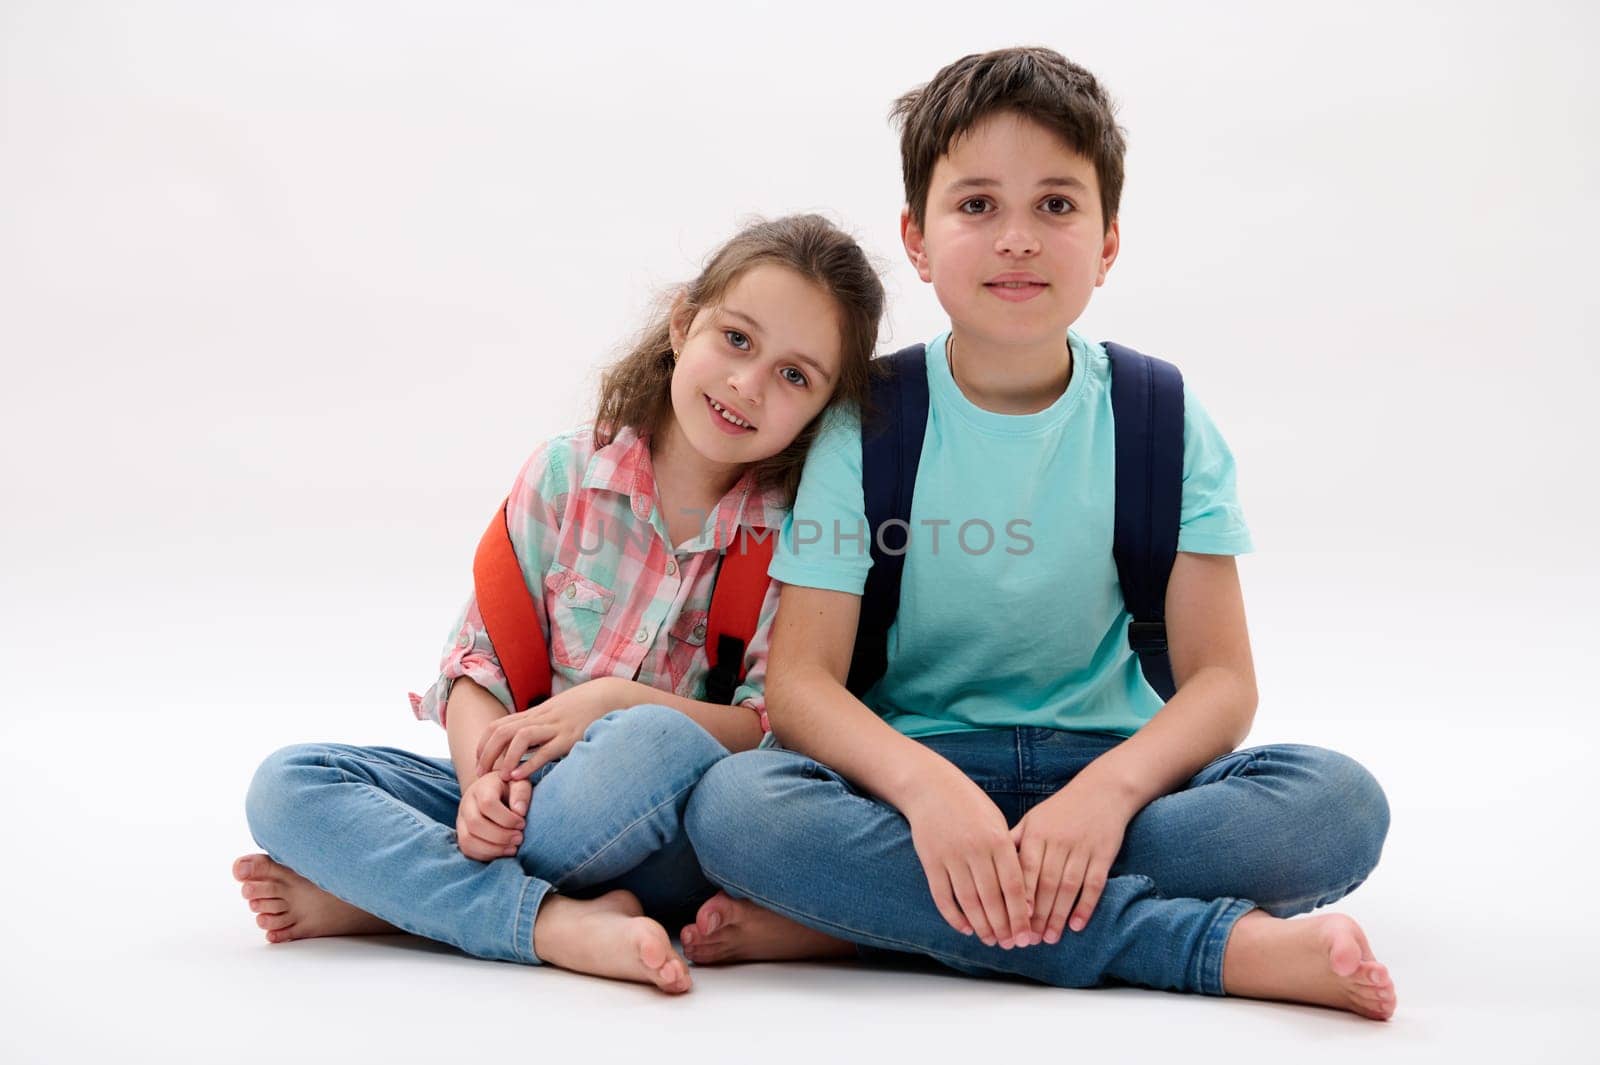 Authentic portrait of happy brother and sister, school kids with backpacks, smiling at camera, isolated white background by artgf